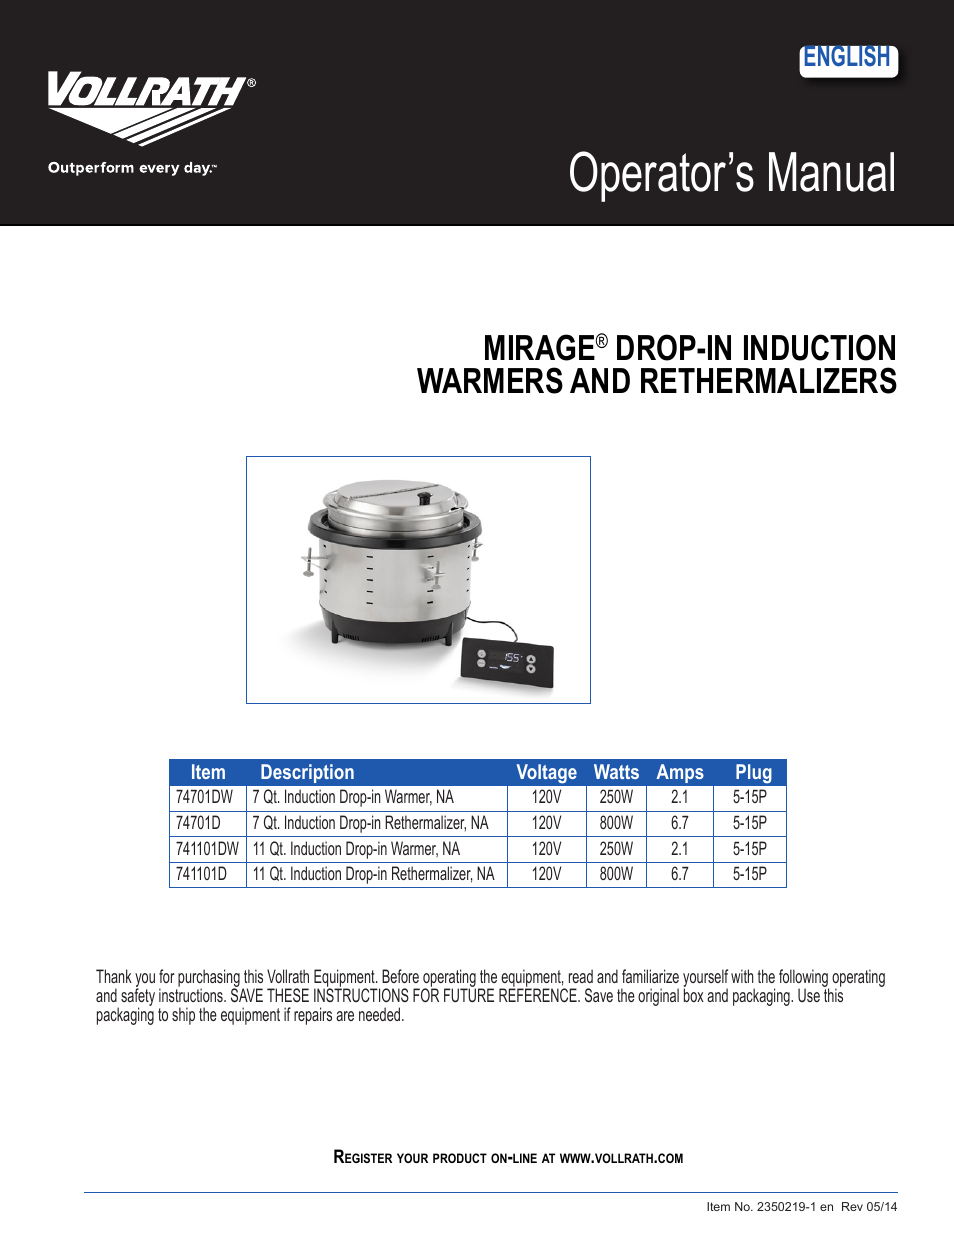 Mirage Drop-In Induction Rethermalizers 7 Qt